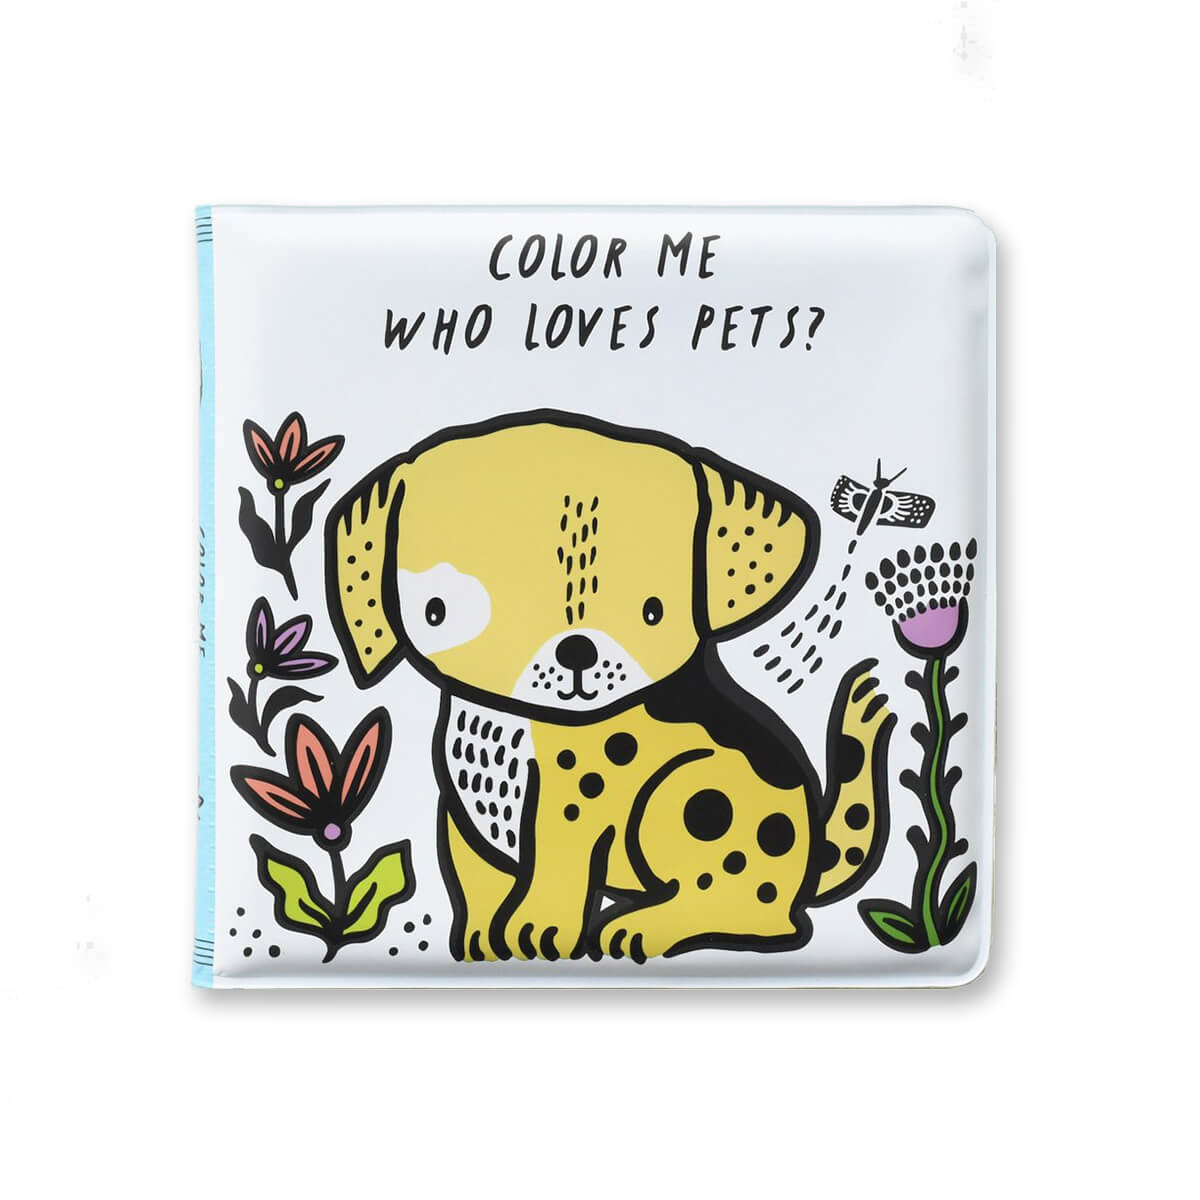 Pets?　Gallery　Me:　Junior　First　Bath　Book　–　Baby's　Wee　Edition　Loves　Who's　Colour　By